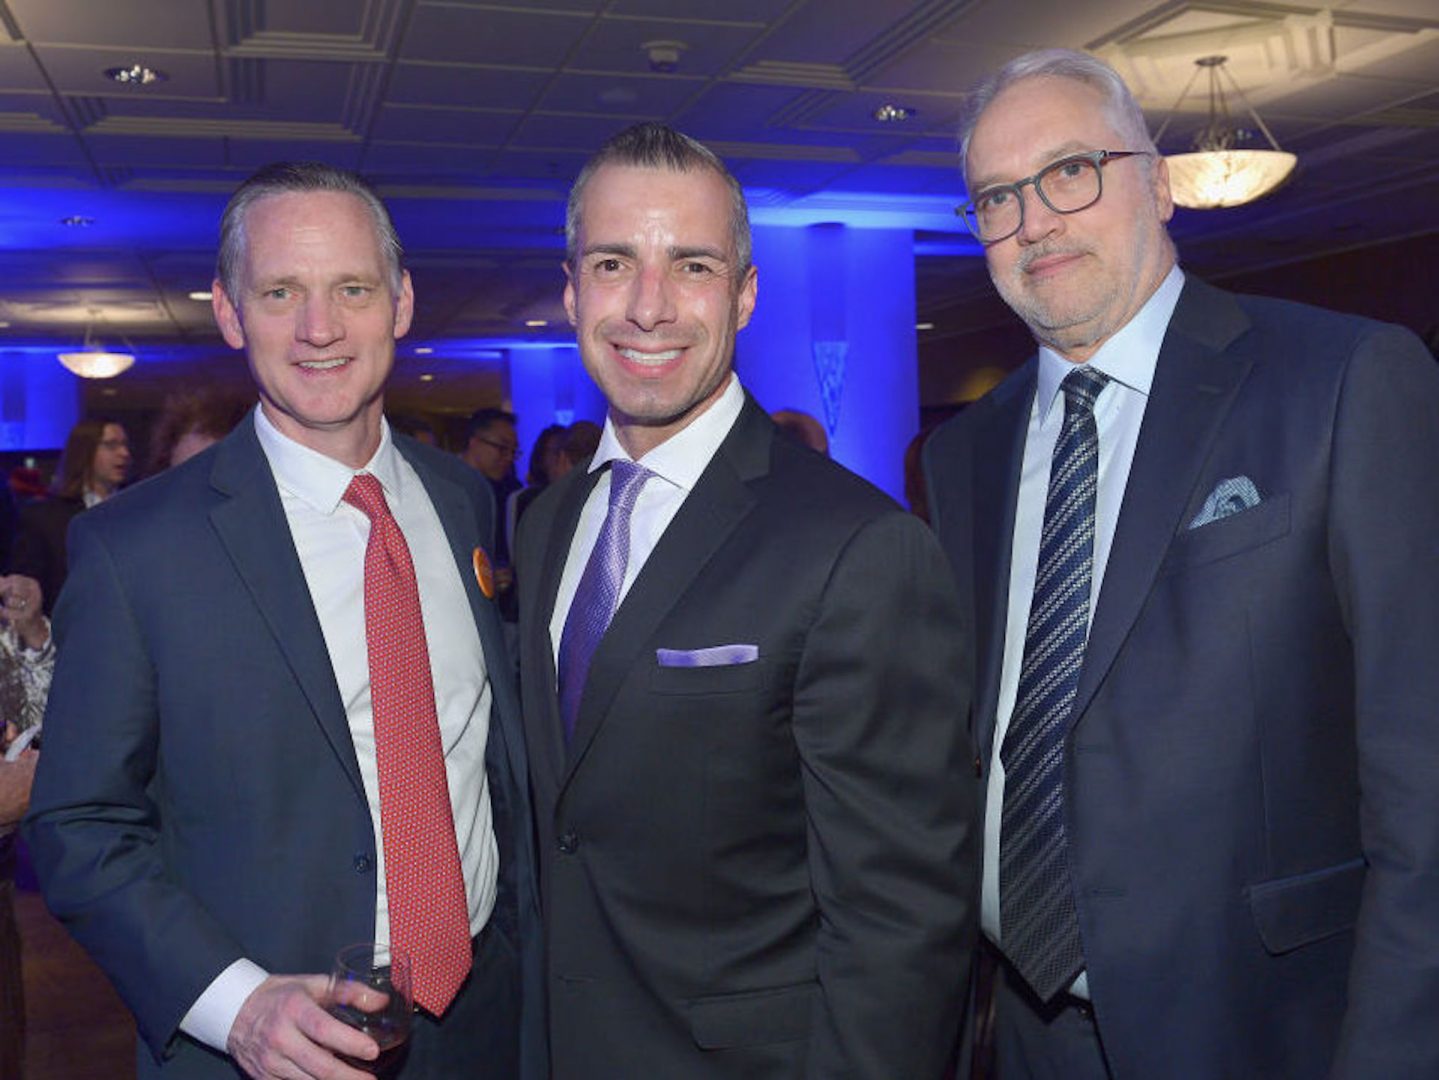 A Martinez (center) has been named a new co-host for NPR's Morning Edition. He is shown with Southern California Public Radio CEO Herb Scannell (right) at a fundraising gala for KPCC in March 2019.